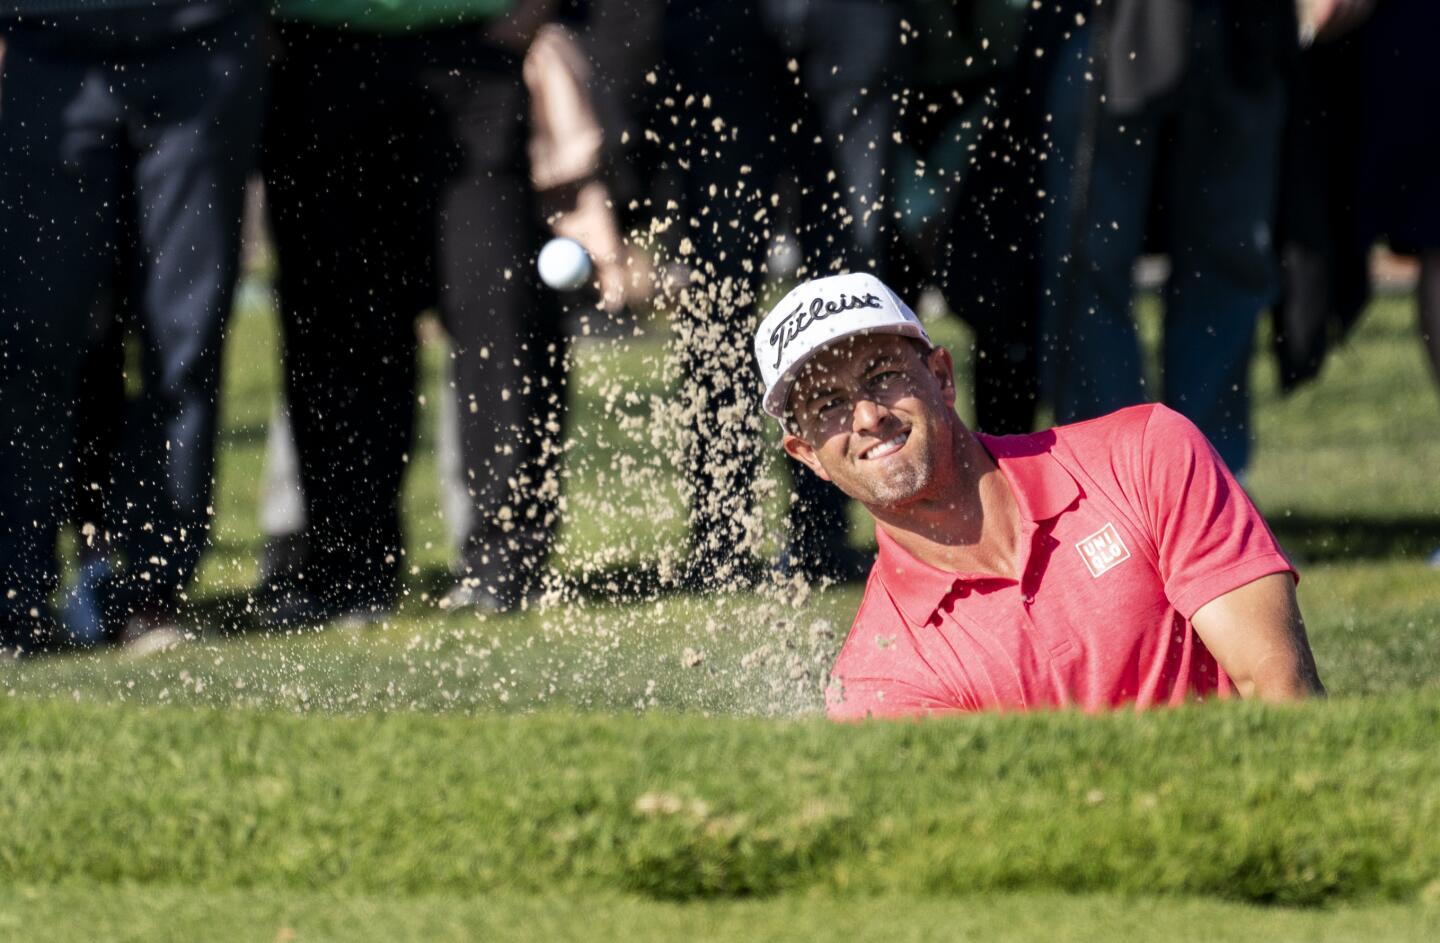 PACIFIC PALISADES, CA - FEBRUARY 16, 2020: Winner Adam Scott blasts out of the sand trap on the 15th hole in the finals of the Genesis Open at Riviera Country Club on February 16, 2020 in Pacific Palisades, California.(Gina Ferazzi/Los AngelesTimes)